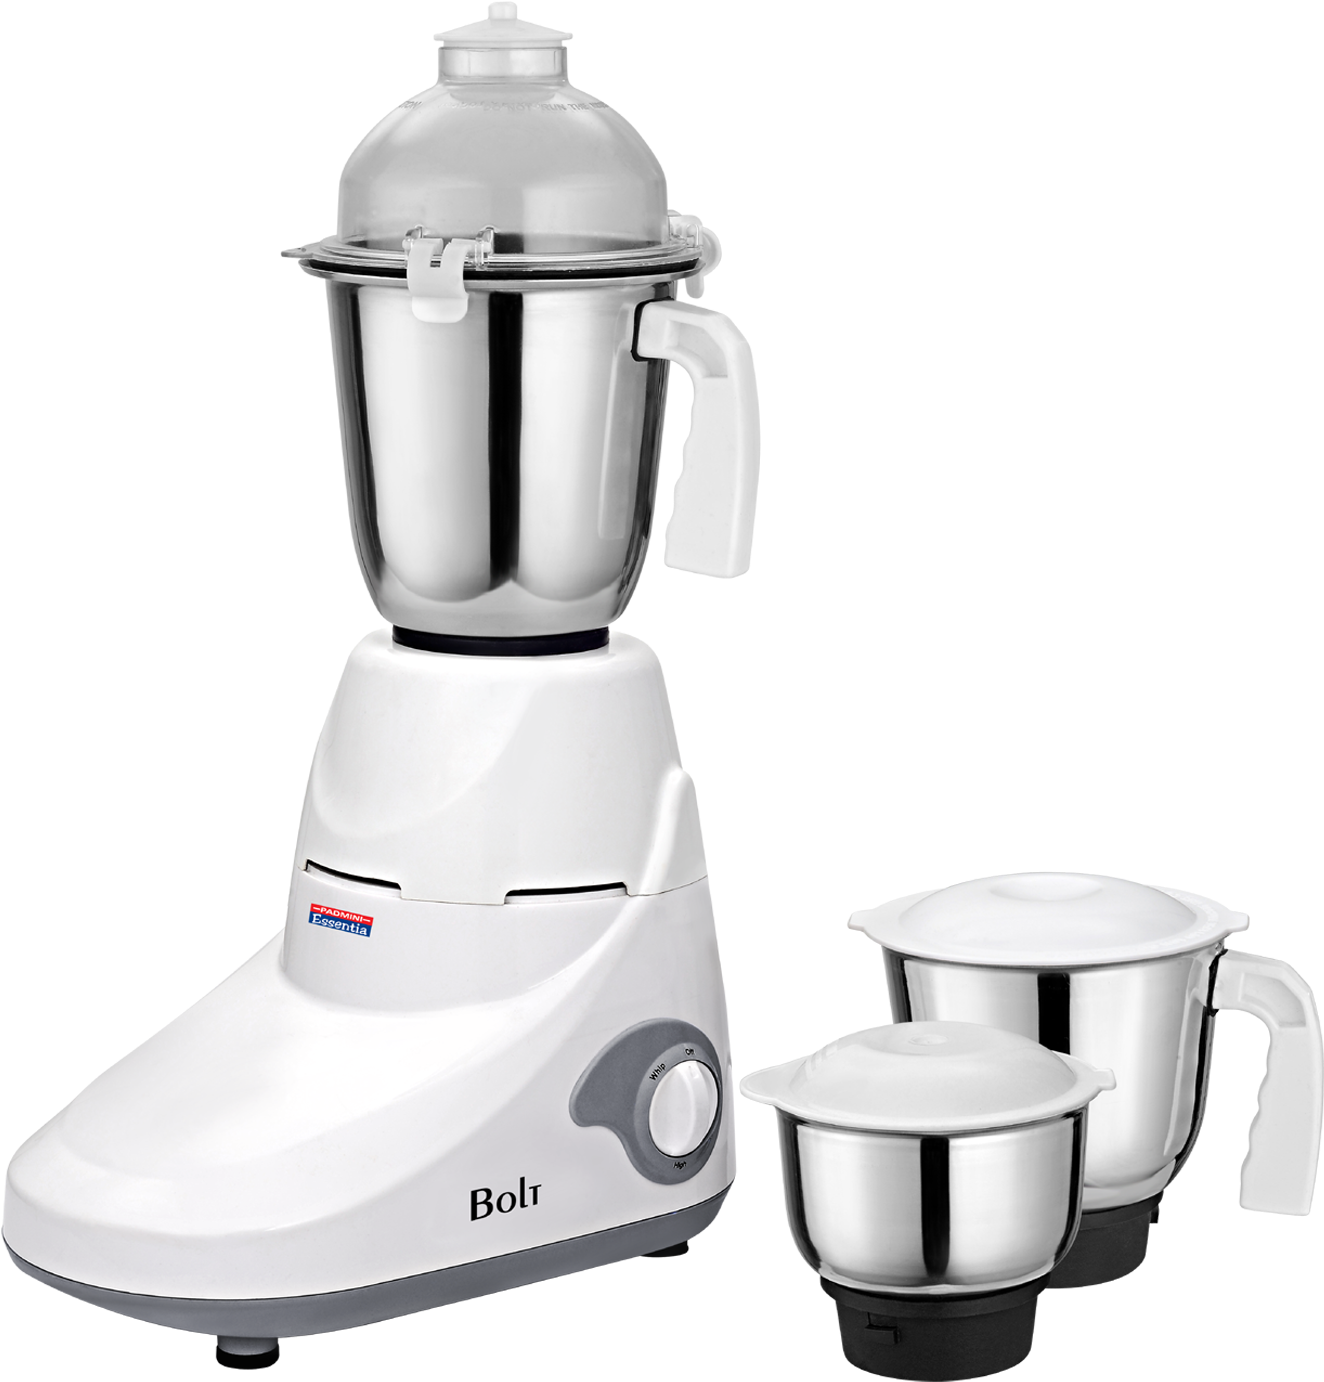 A White Blender With A Black Background